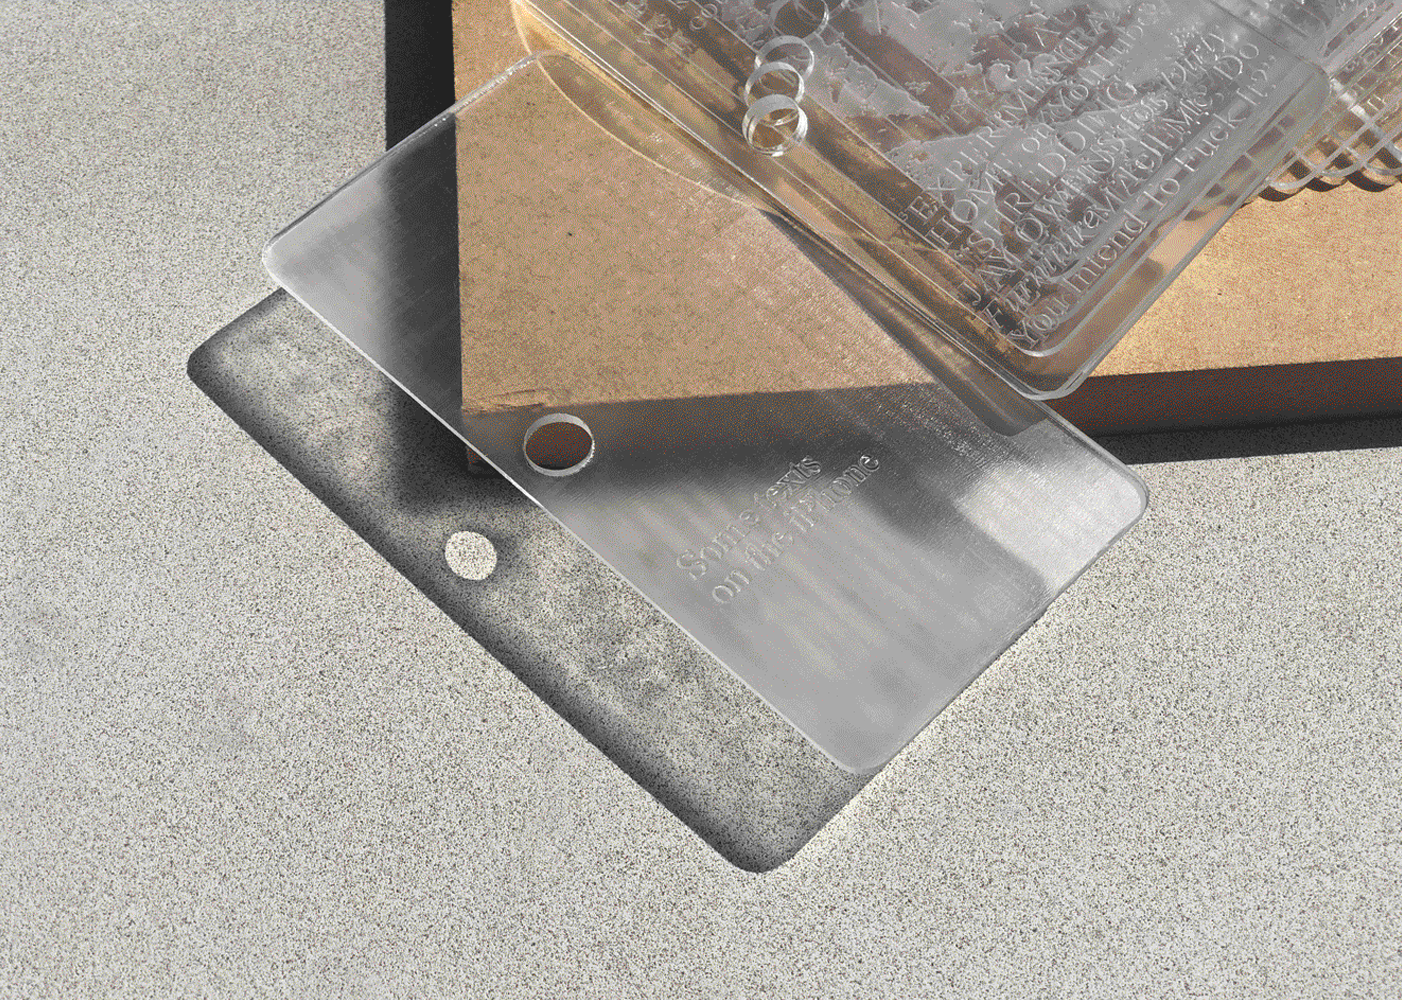 sheets of clear plastic shaped like smartphones, with a hole punched in the margin to the left, displayed against a concrete background. other sheets of plastic are placed across a wooden board.